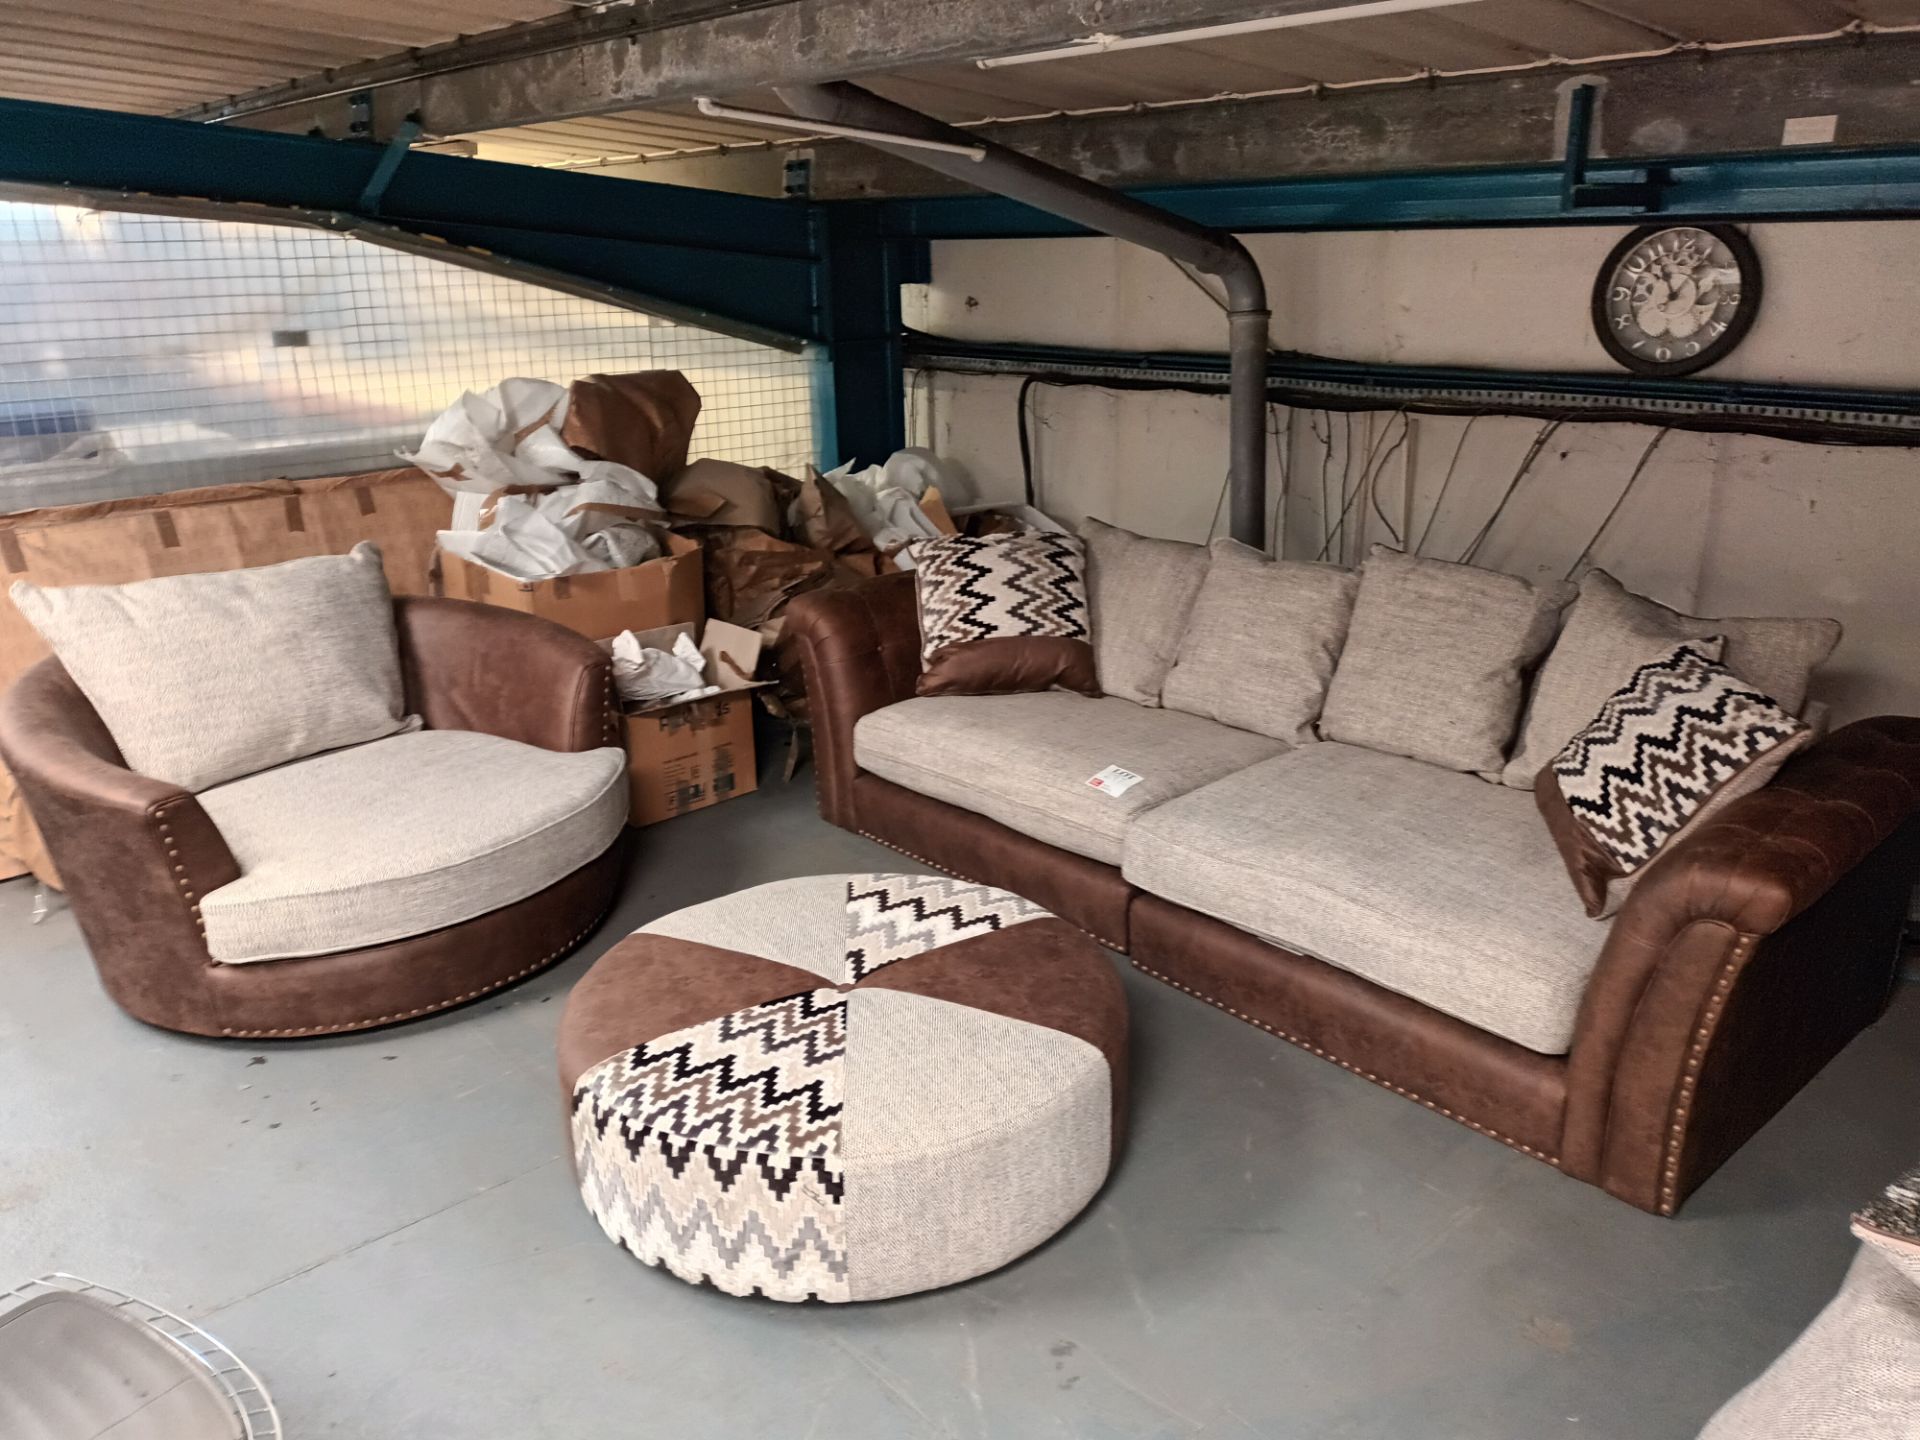 Brown suede effect upholstered Chesterfield style two seater sofa with beige cushions with matching